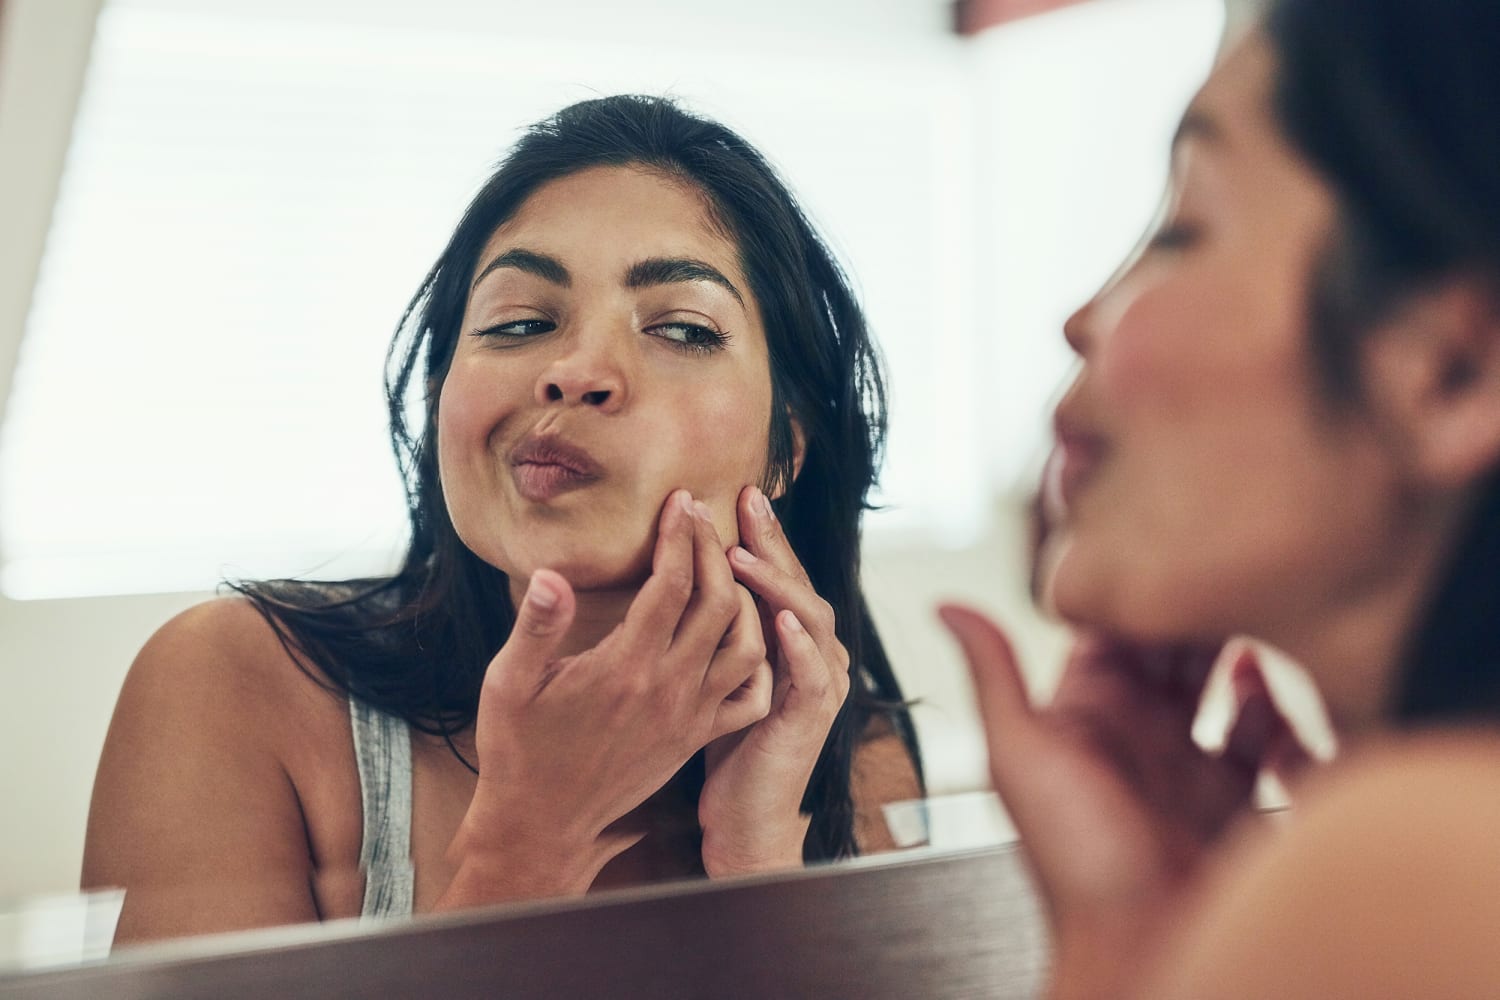 The best skin care products for acne-prone skin, according to dermatologists